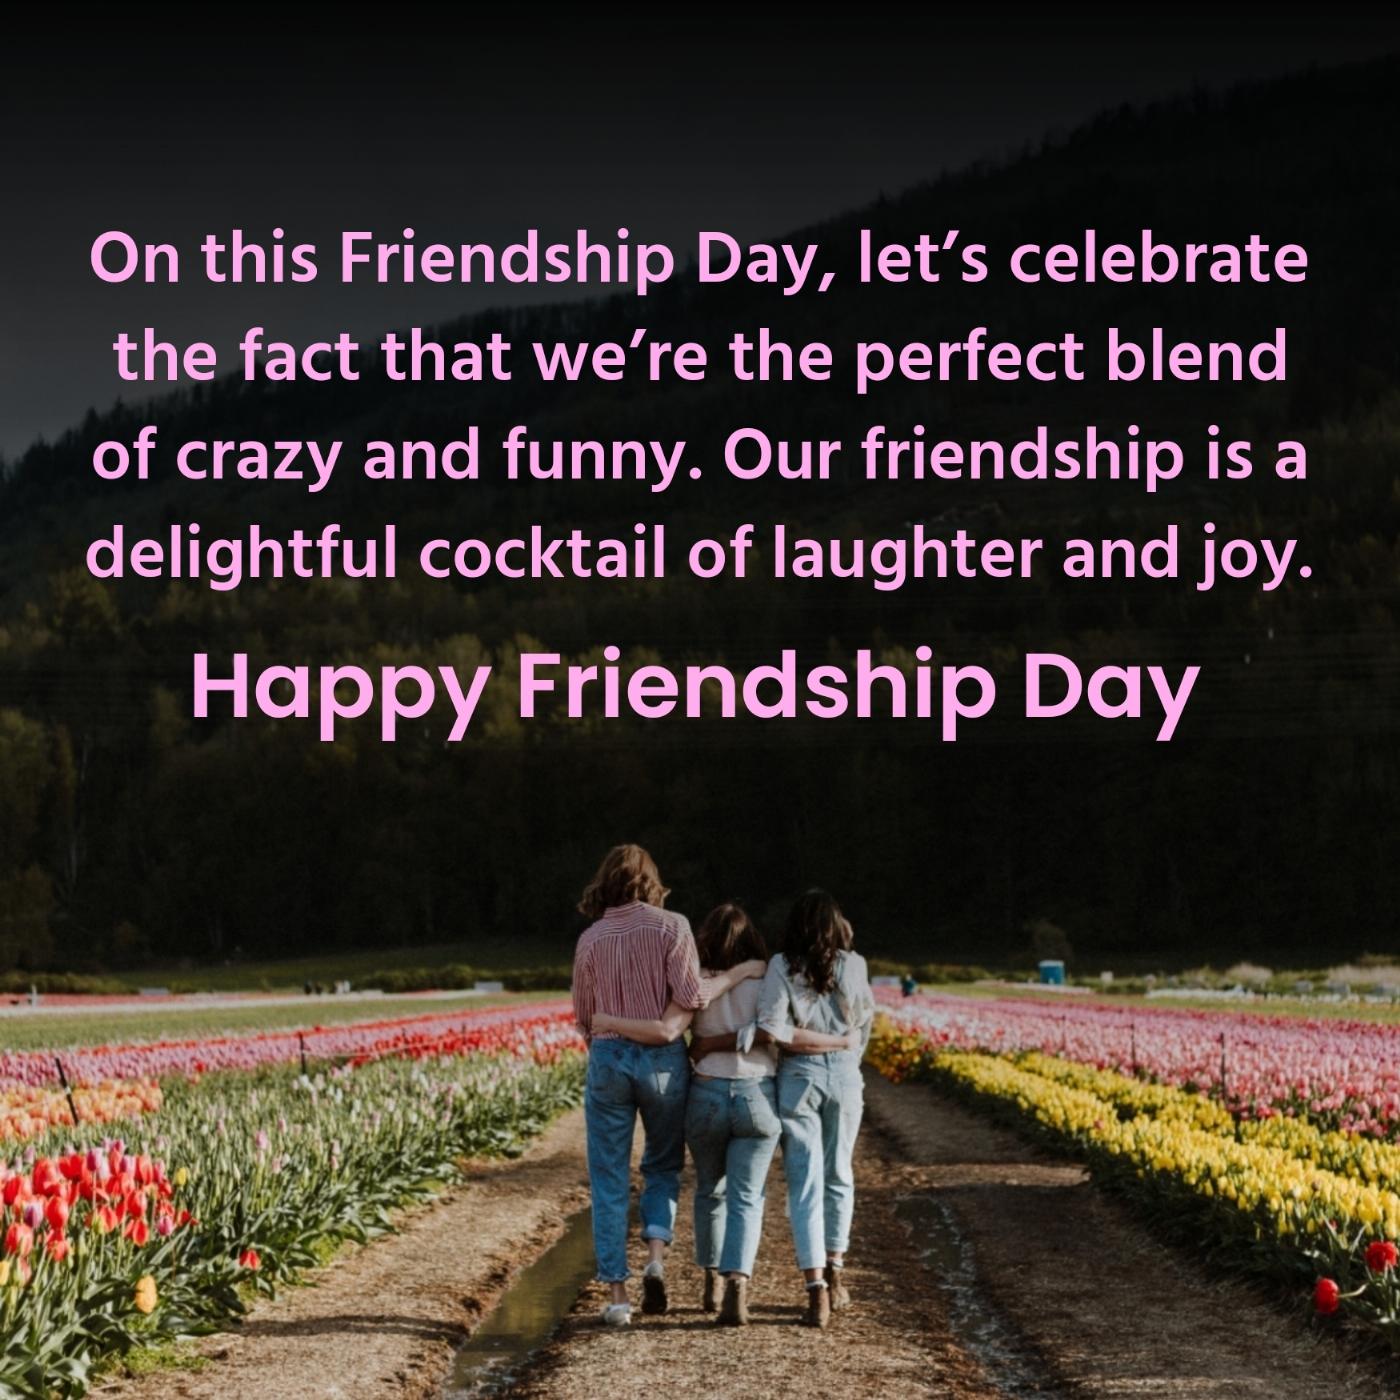 On this Friendship Day lets celebrate the fact that were the perfect blend of crazy and funny Our friendship is a delightful cocktail of laughter and joy